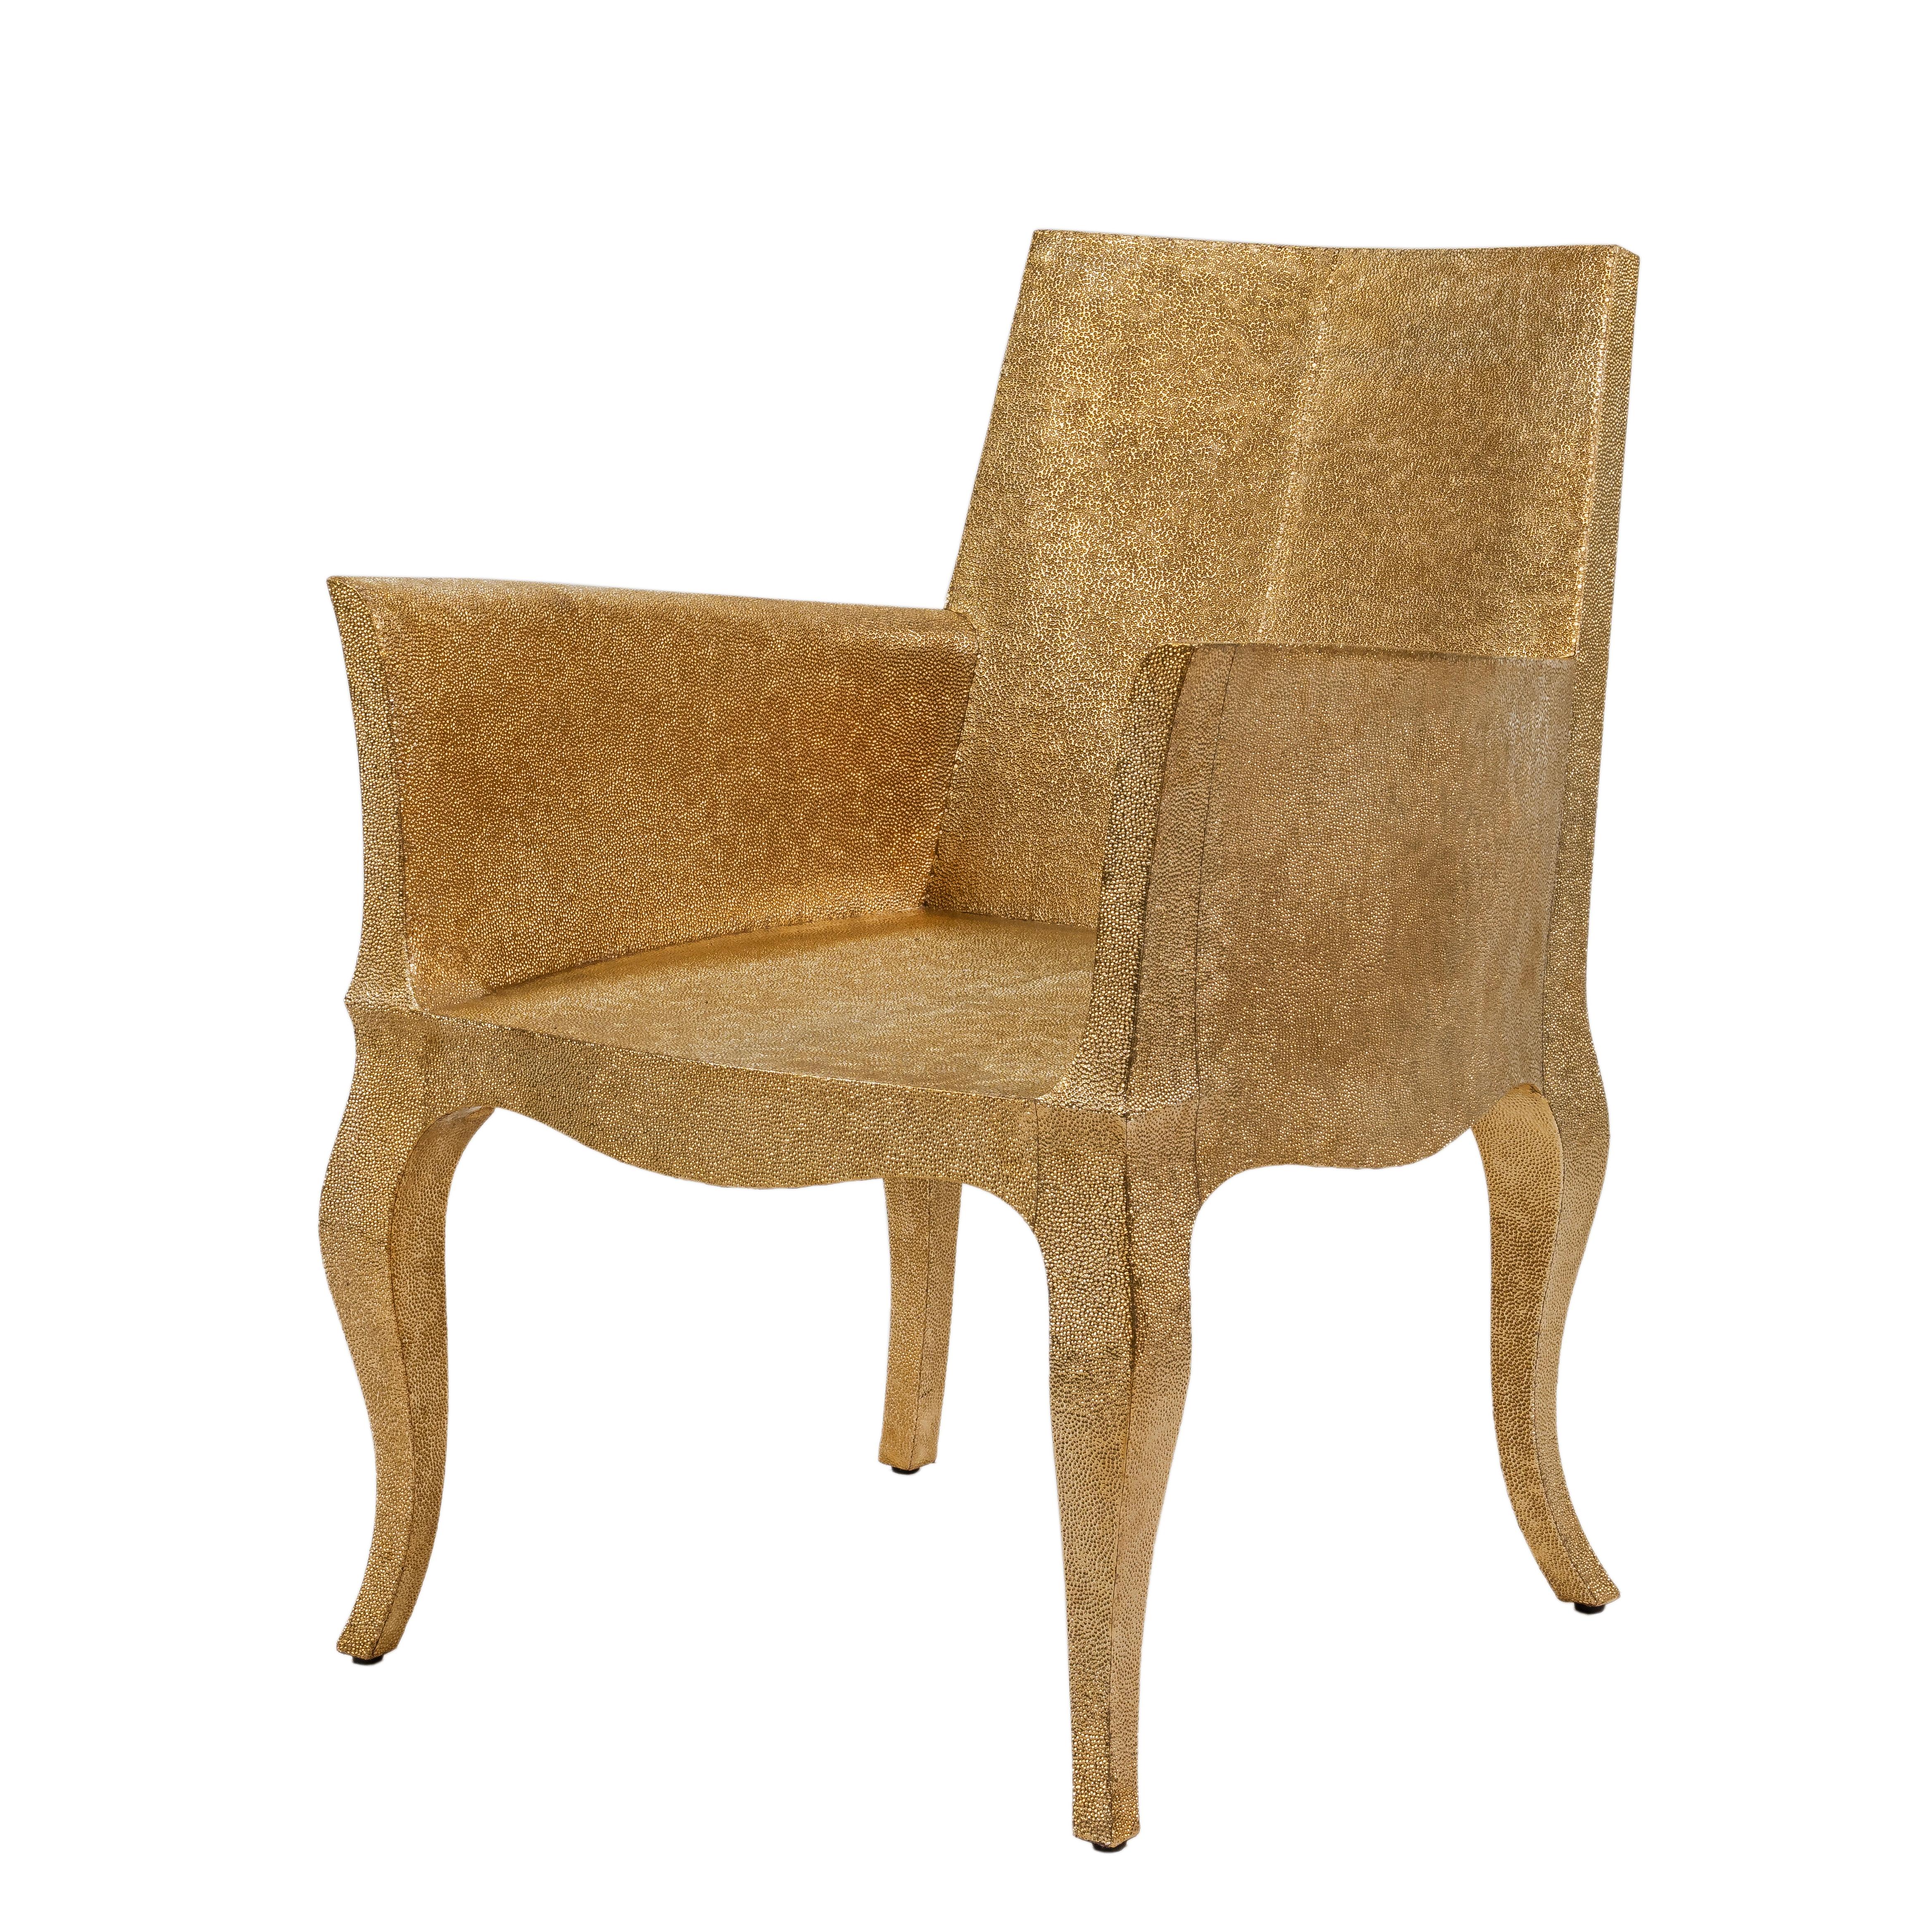 Introducing the Art Deco Chairs, a stunning  Art Deco Chairs set designed by the renowned Paul Mathieu for Stephanie Odegard. This elegant Art Deco Chair duo boasts a unique curved profile that exudes a sophisticated and timeless charm, making it